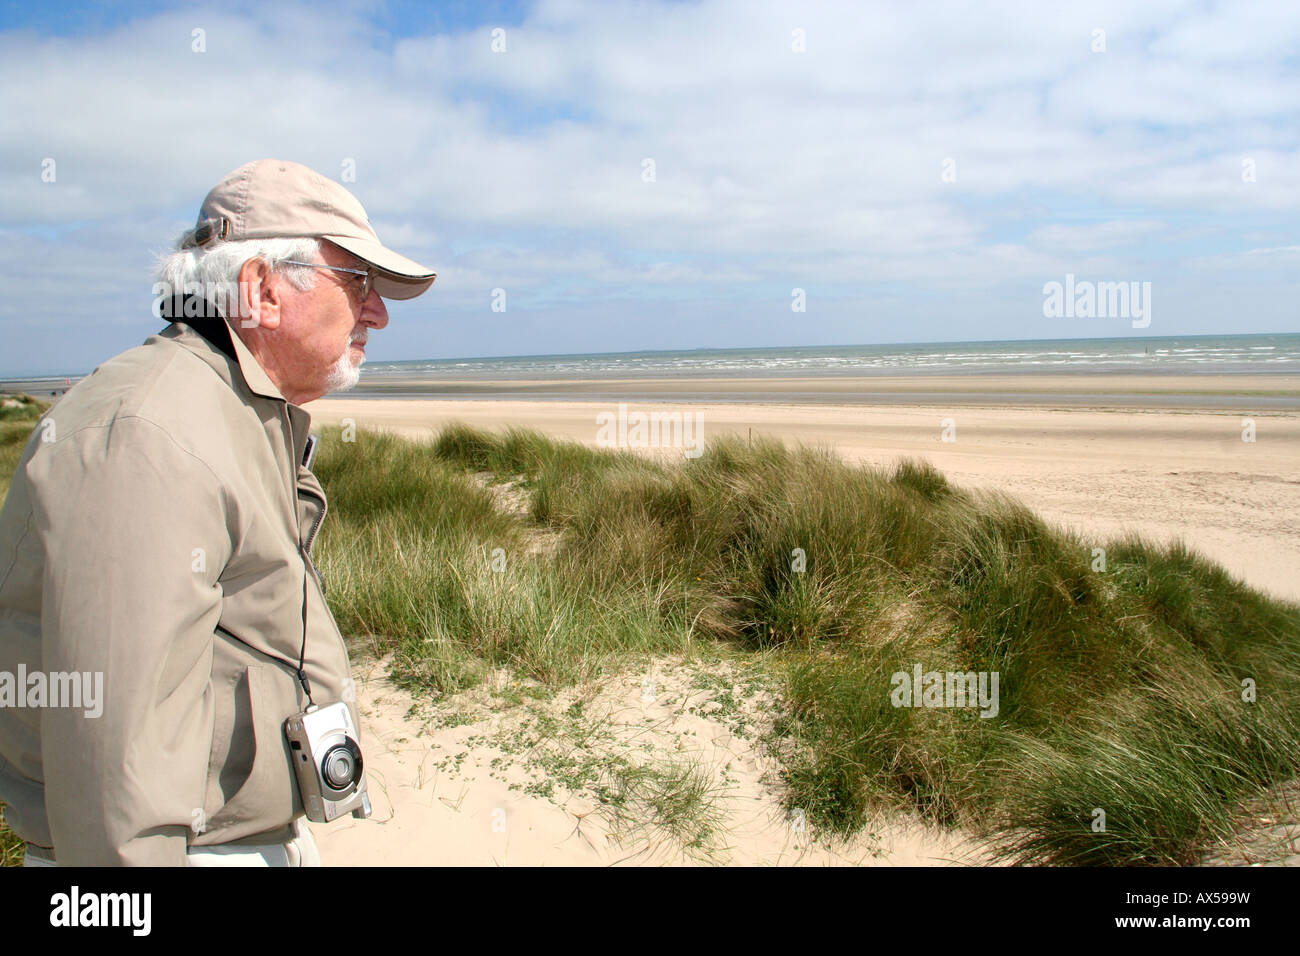 american d-day veteran harry kulkowitz returns for the first time to utah beach normandy after 60 years D-Day anniversary Stock Photo